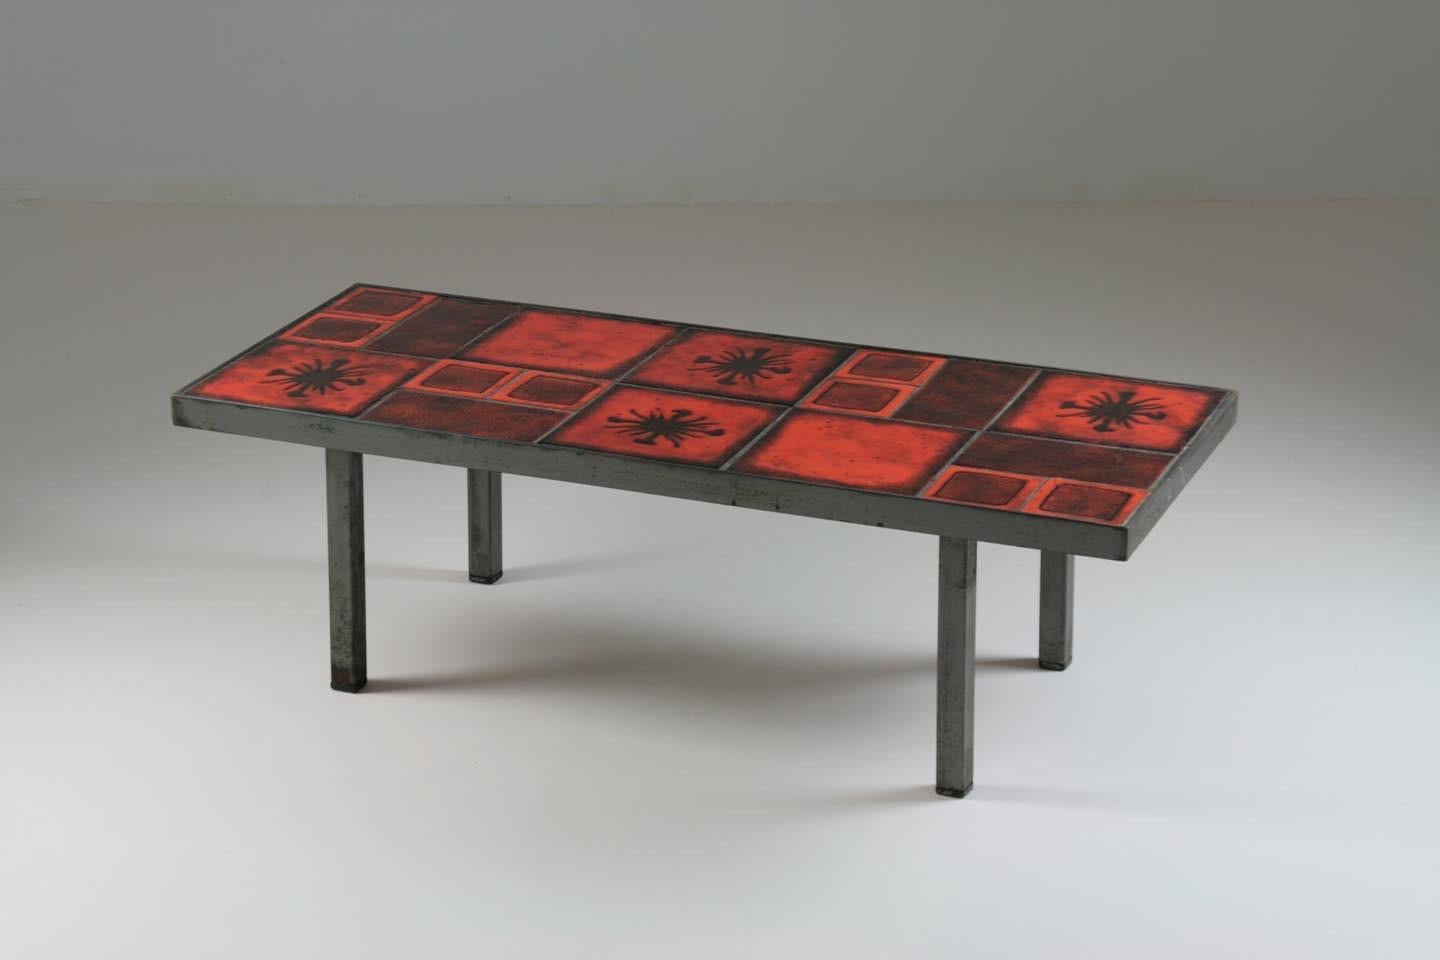 Ceramic Coffee Table and Metal Legs, France, 1950s For Sale 1